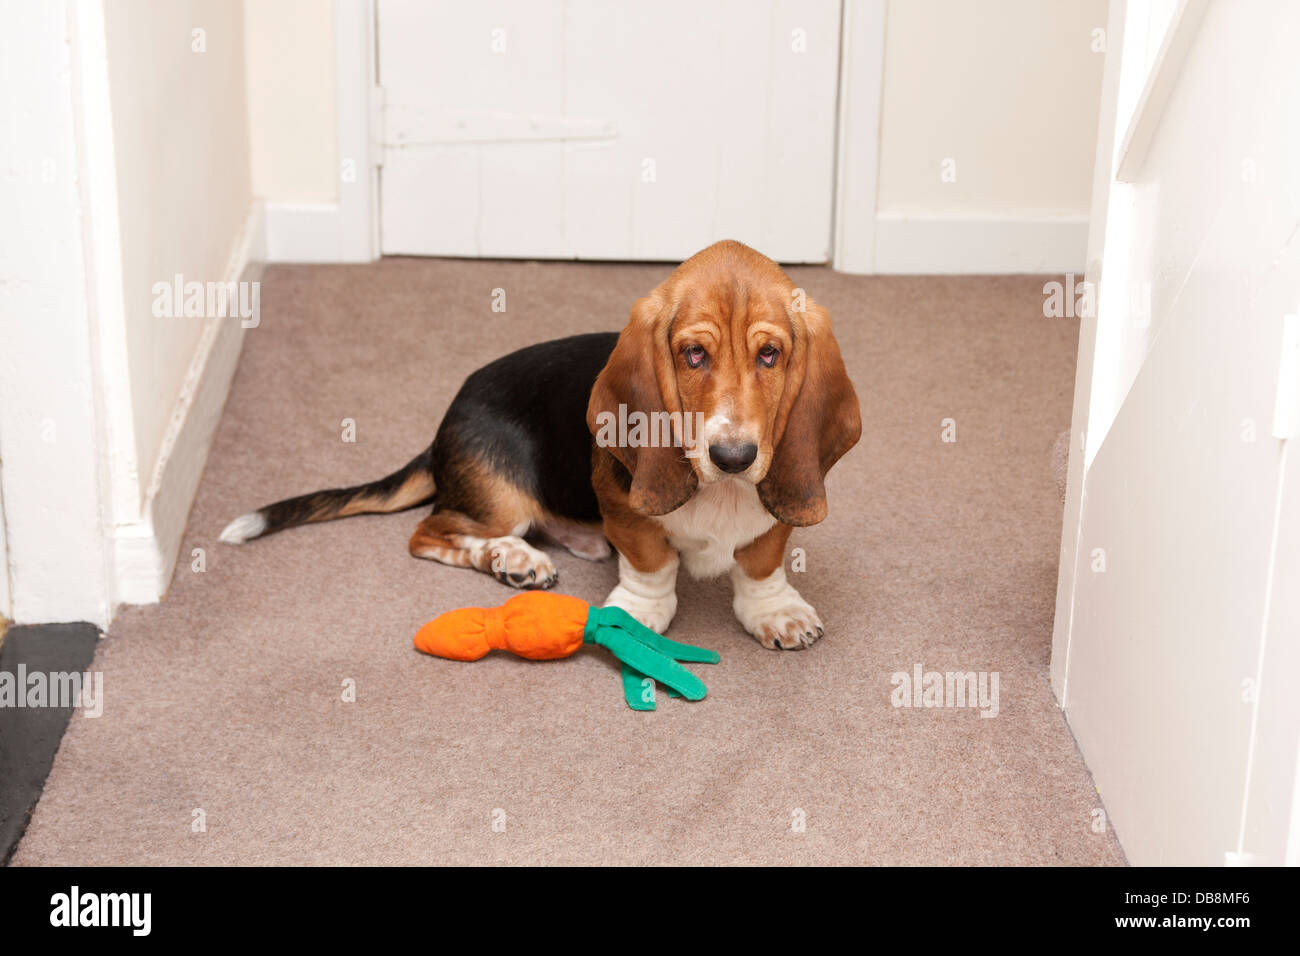 Bassett hound puppy sitting with toy Banque D'Images